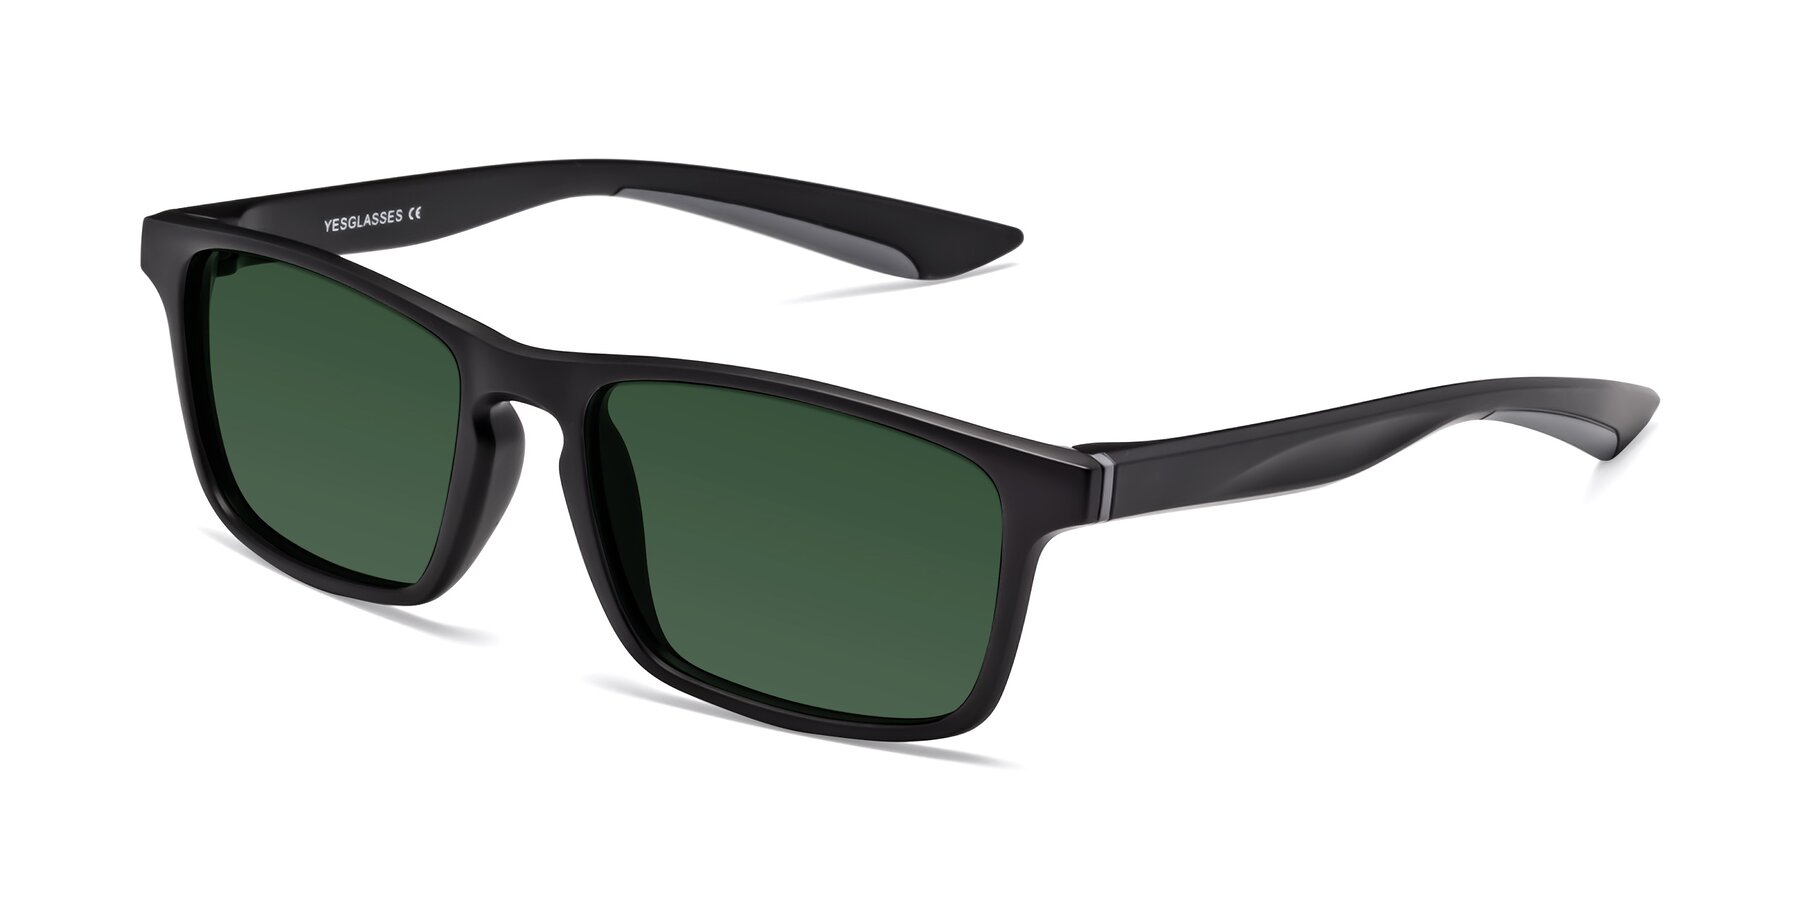 Angle of Passion in Matte Black-Gray with Green Tinted Lenses